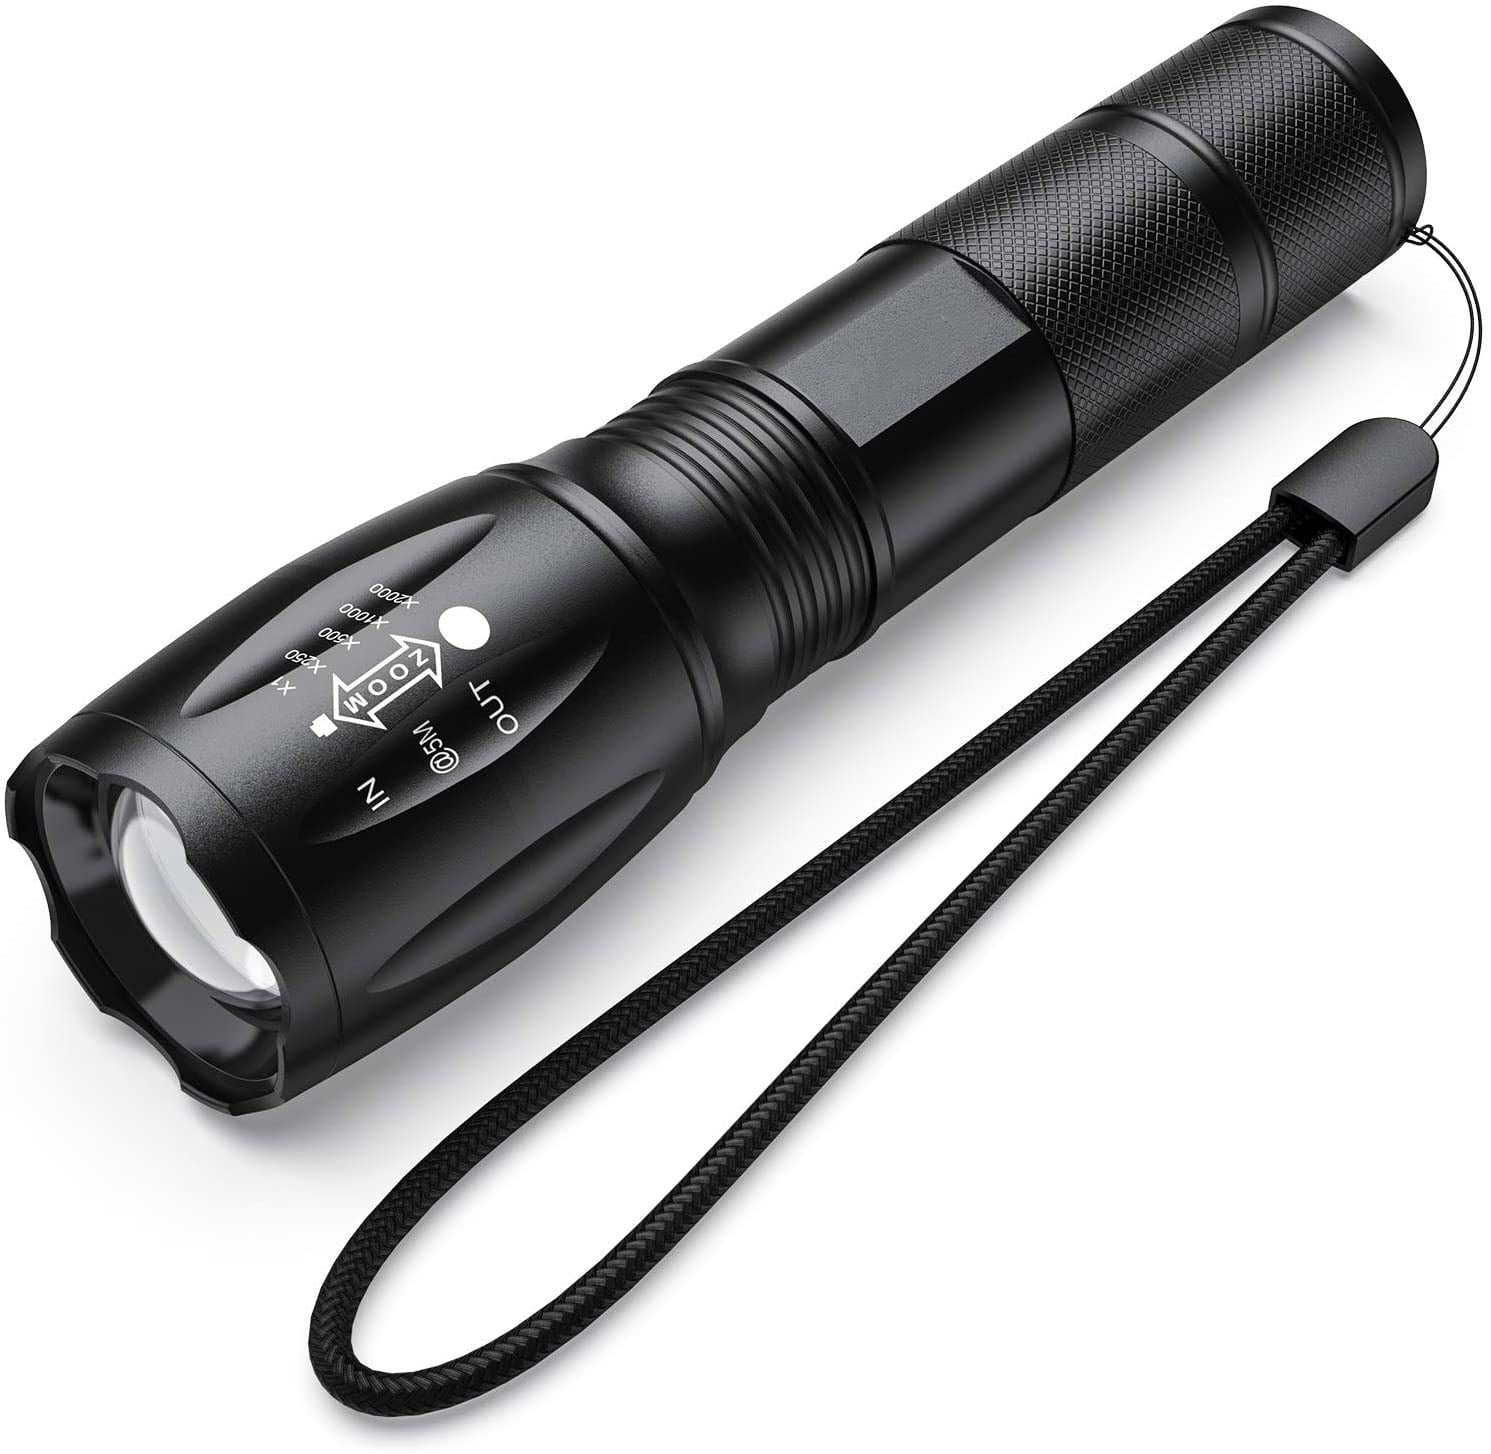 30000LM Tactical Rechargeable T6 LED 5 Modes SOS 18650 Flashlight Night Light